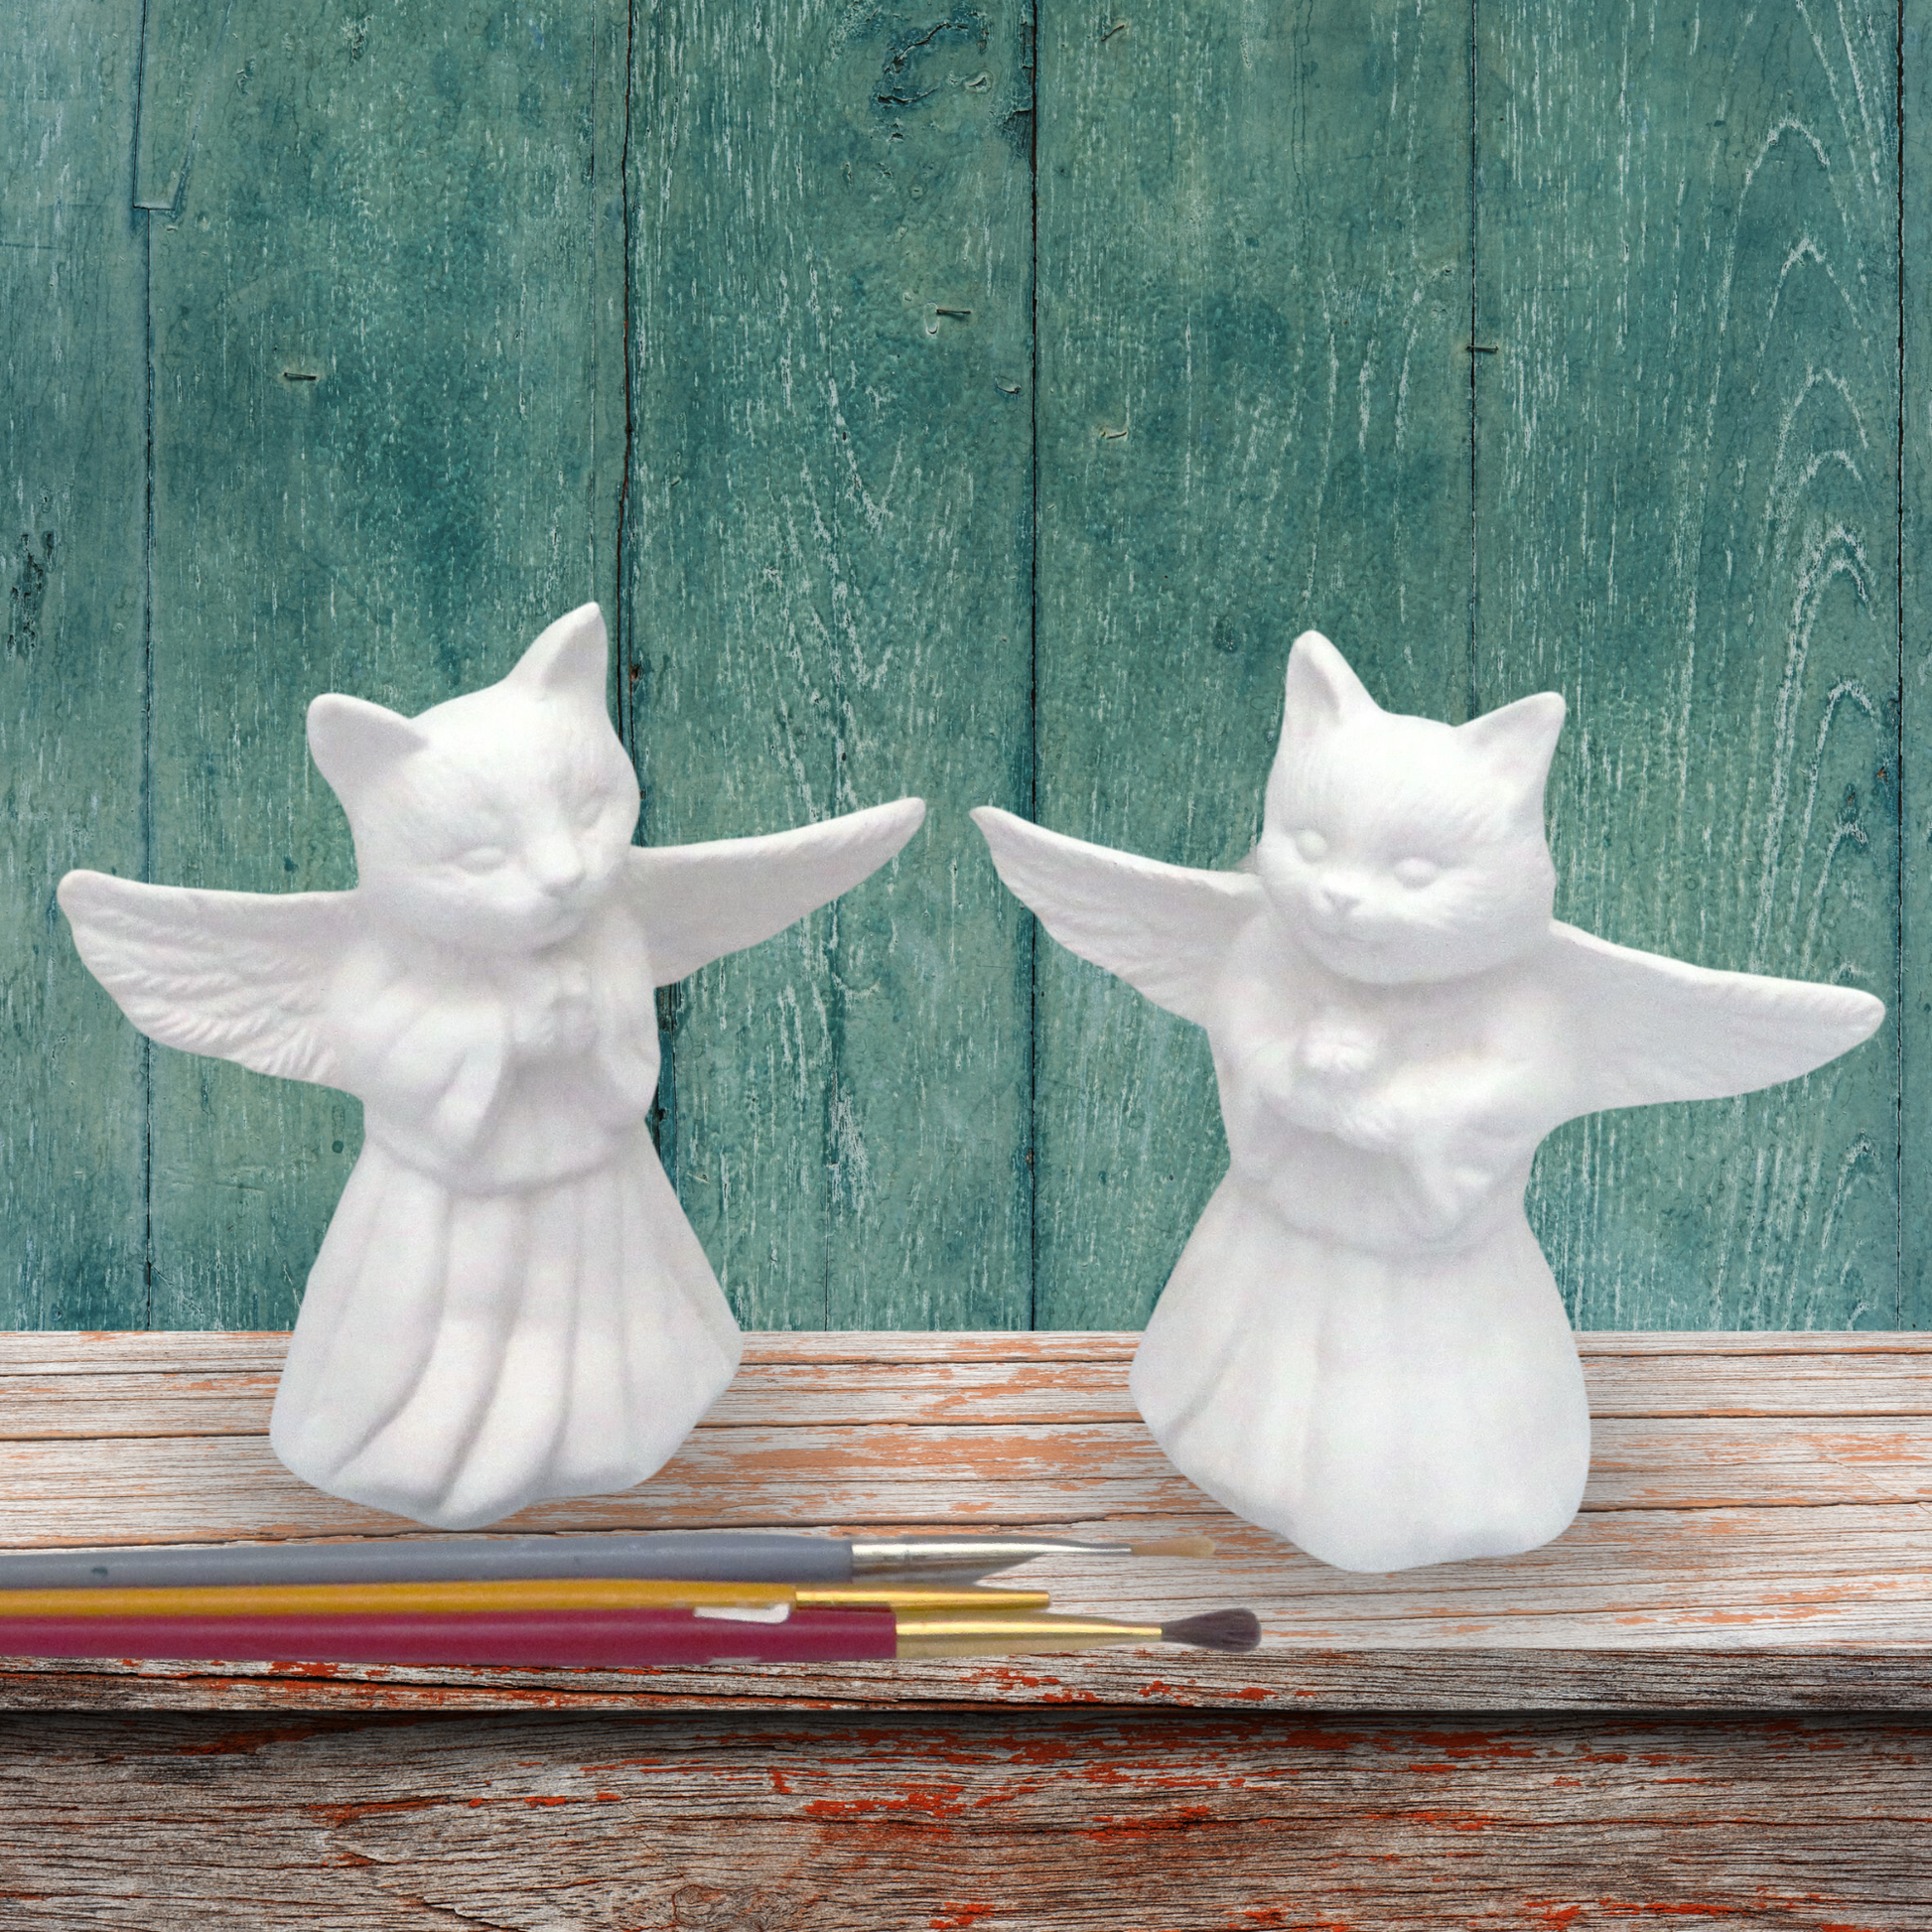 set of 2 ready to paint ceramic cat angels on a rustic wooden shelf with a green backgraound and 2 paint brushes